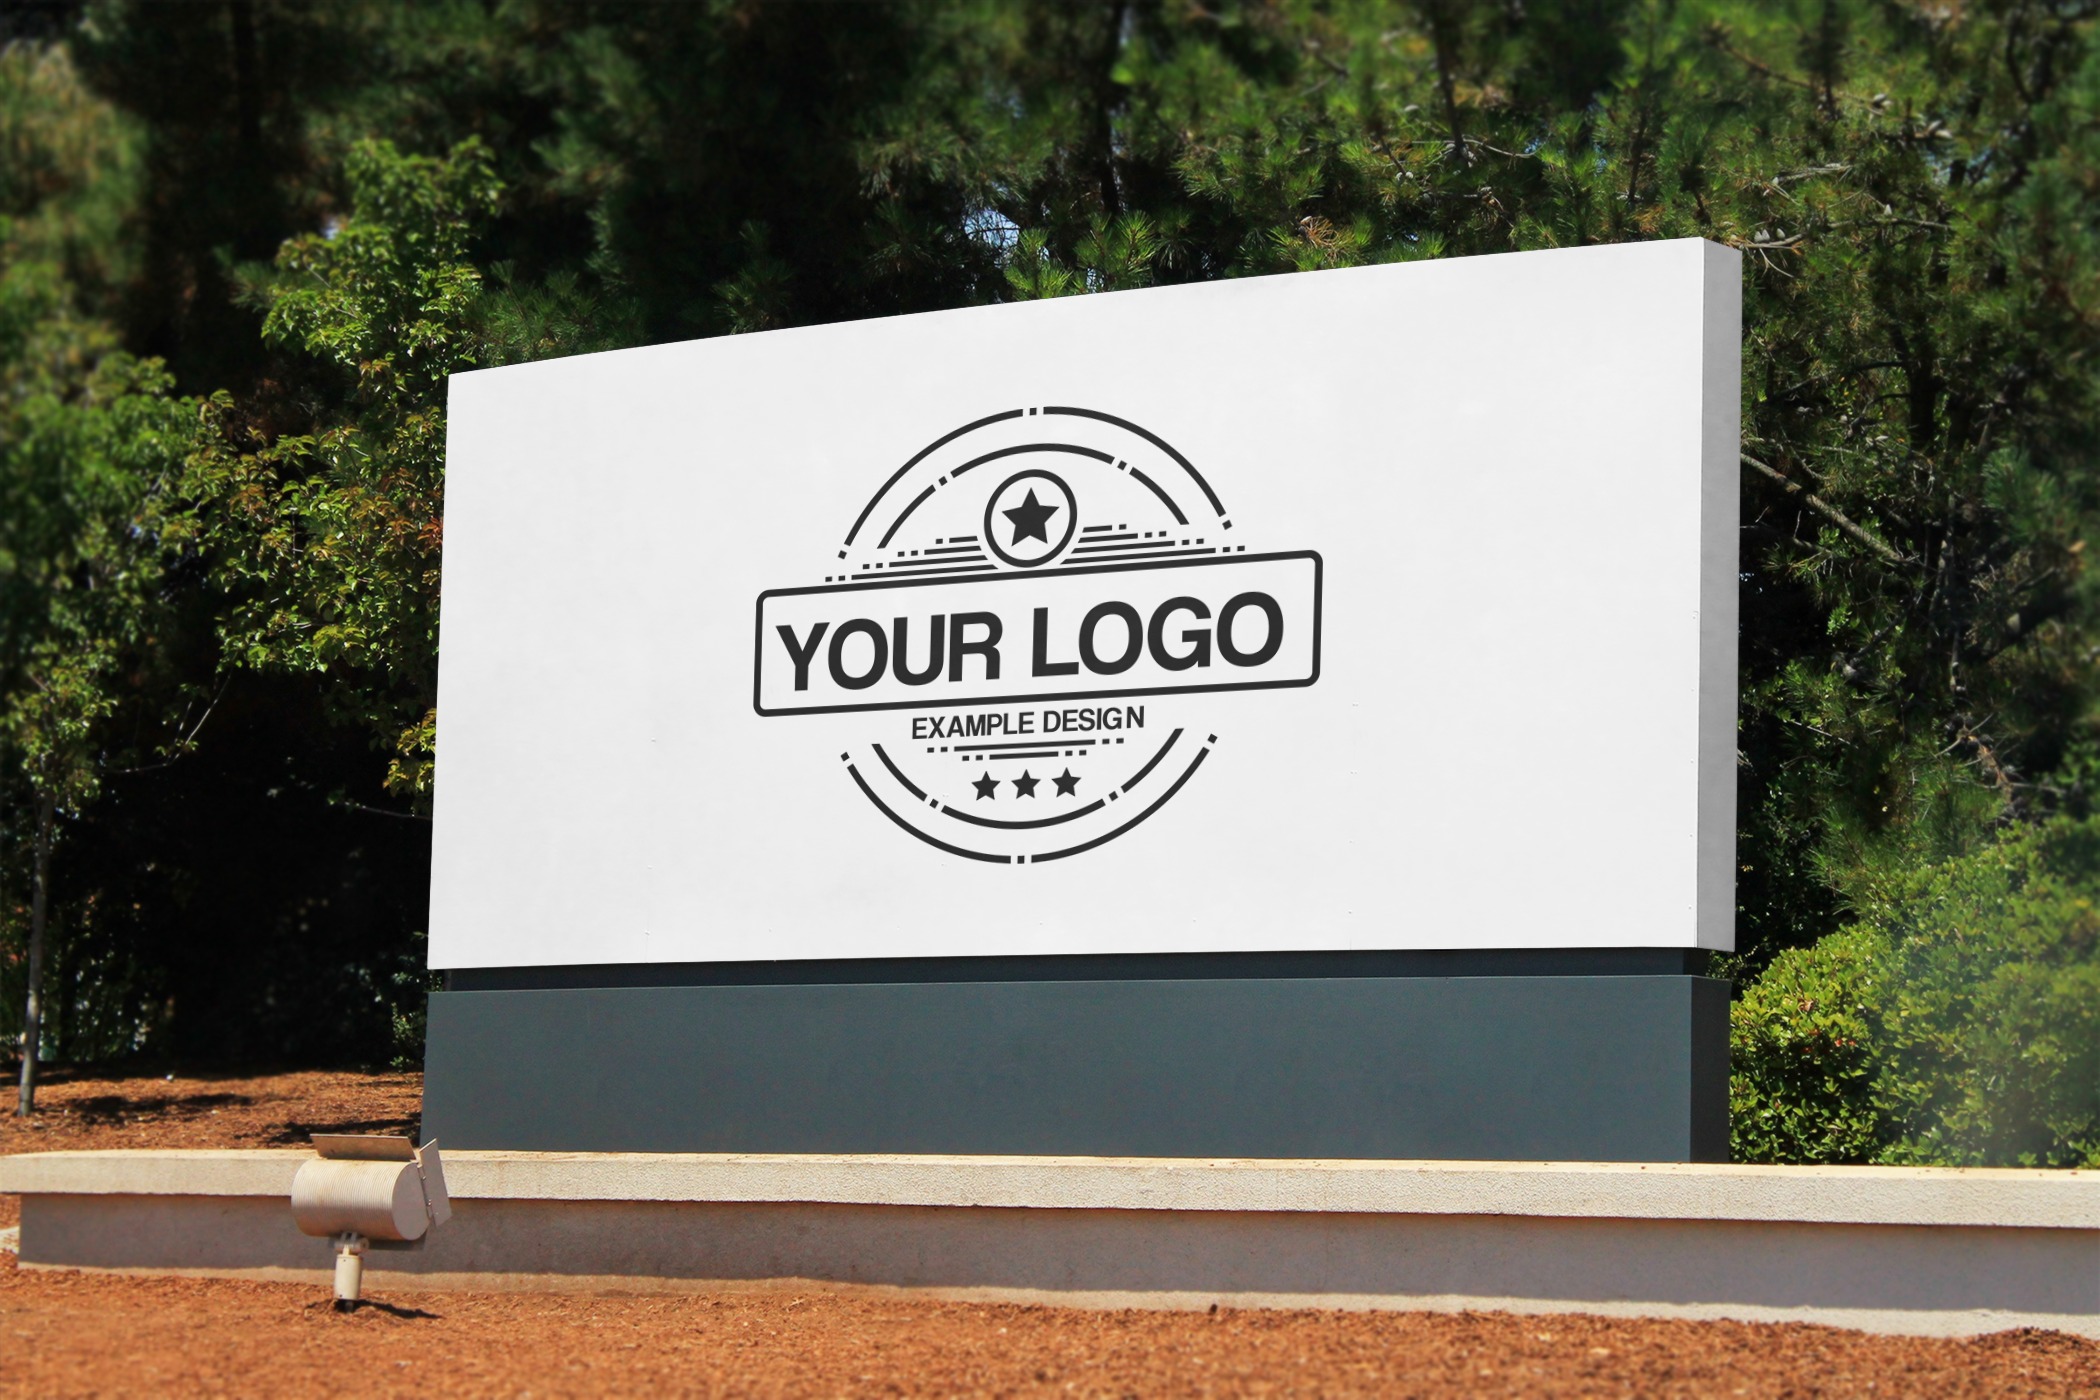 logo on outdoor company sign plate online mockup